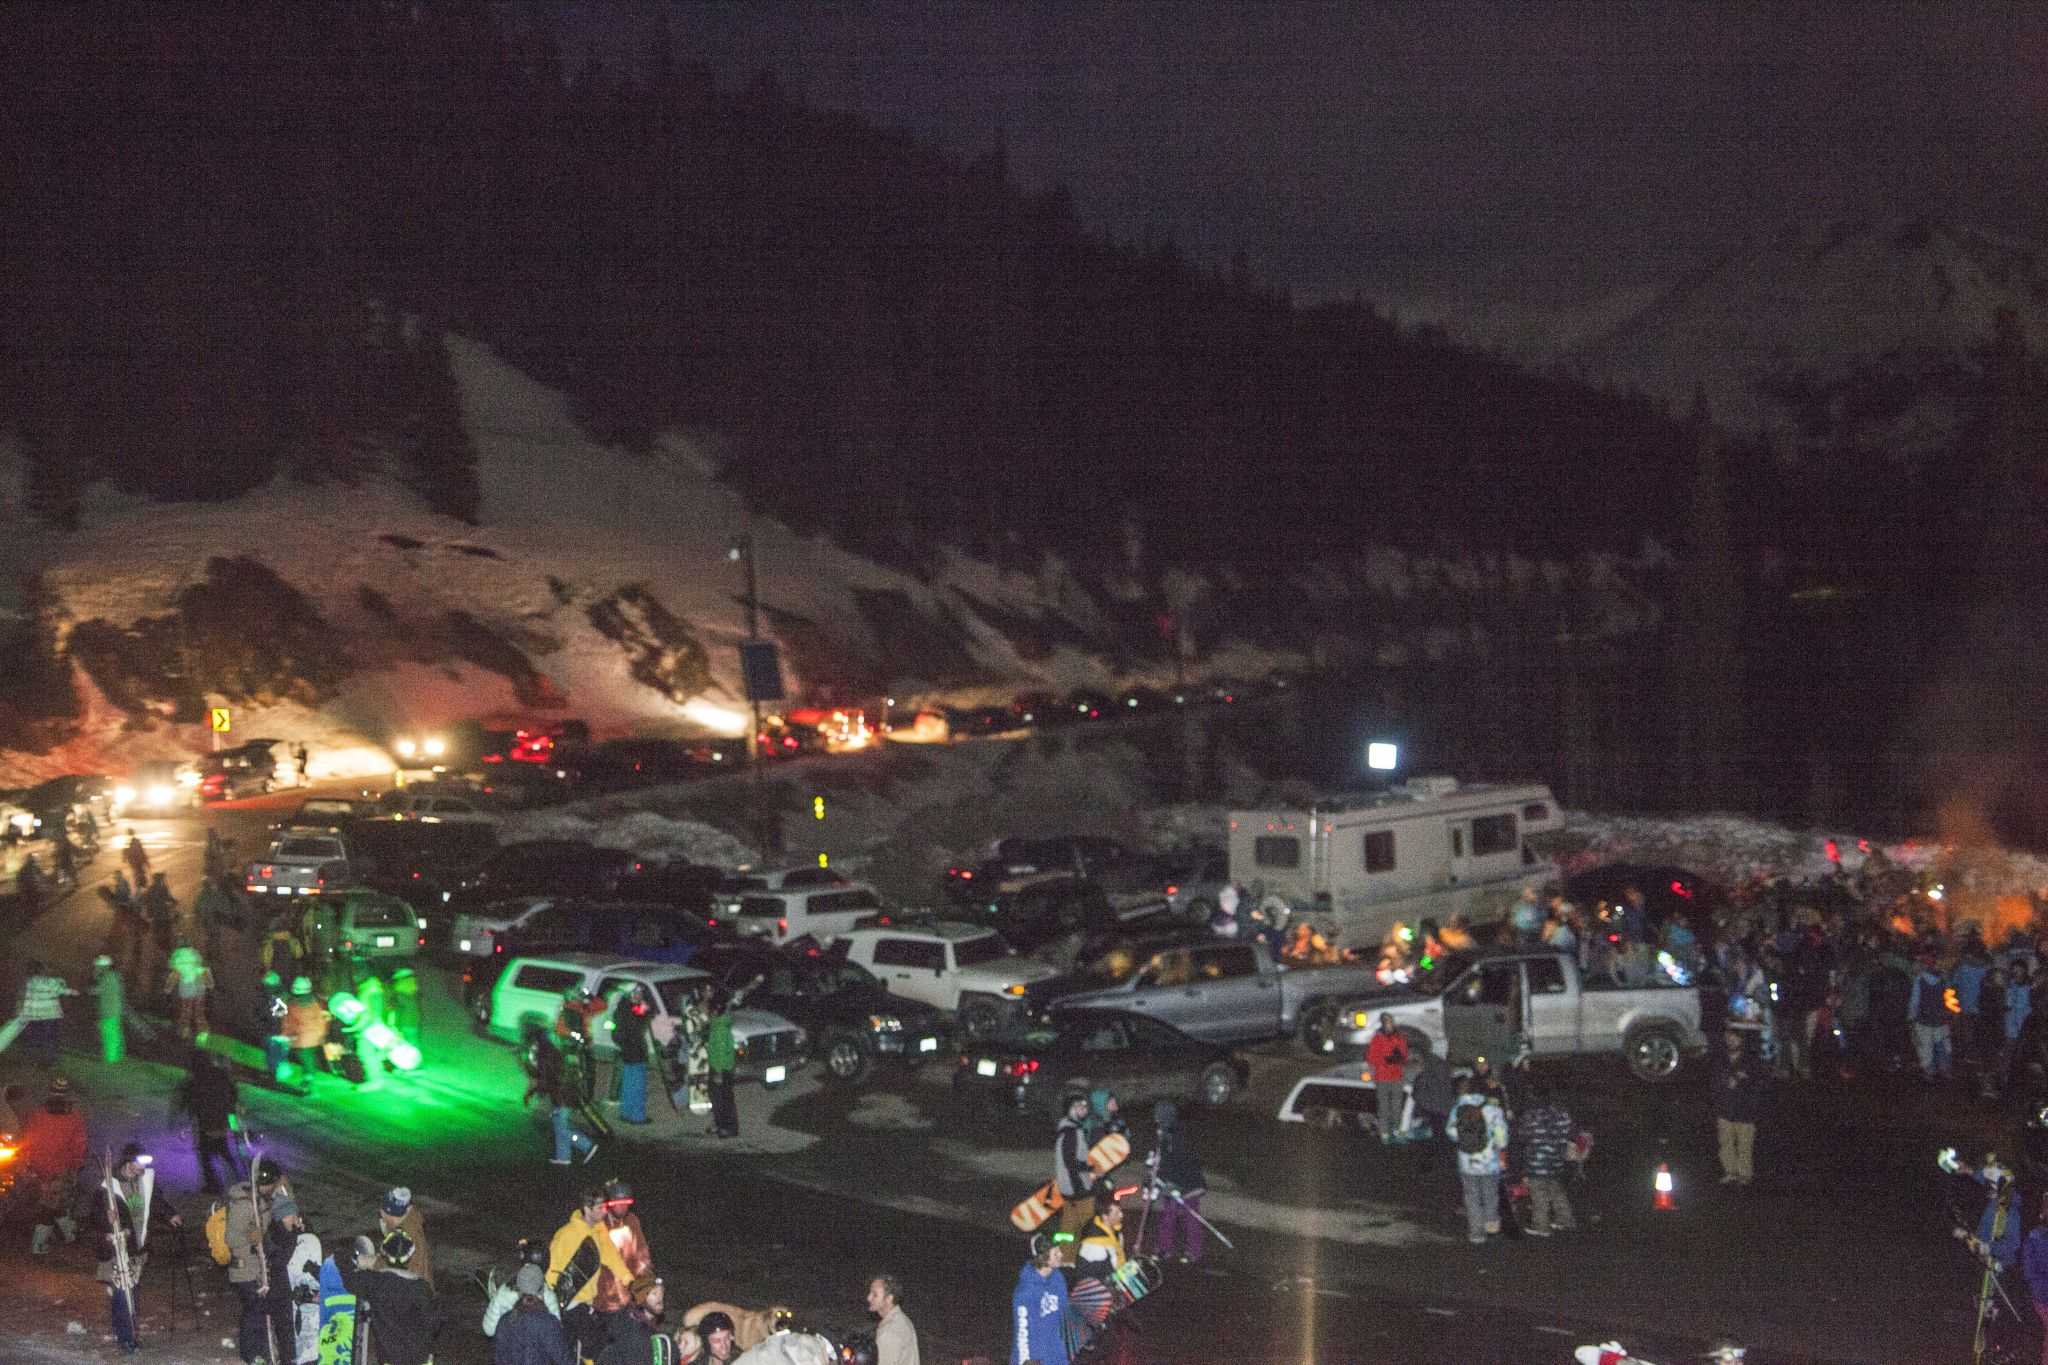 People wait in anticipation for a ride to the tope of Loveland Pass. Photo by: Nevin Fowler